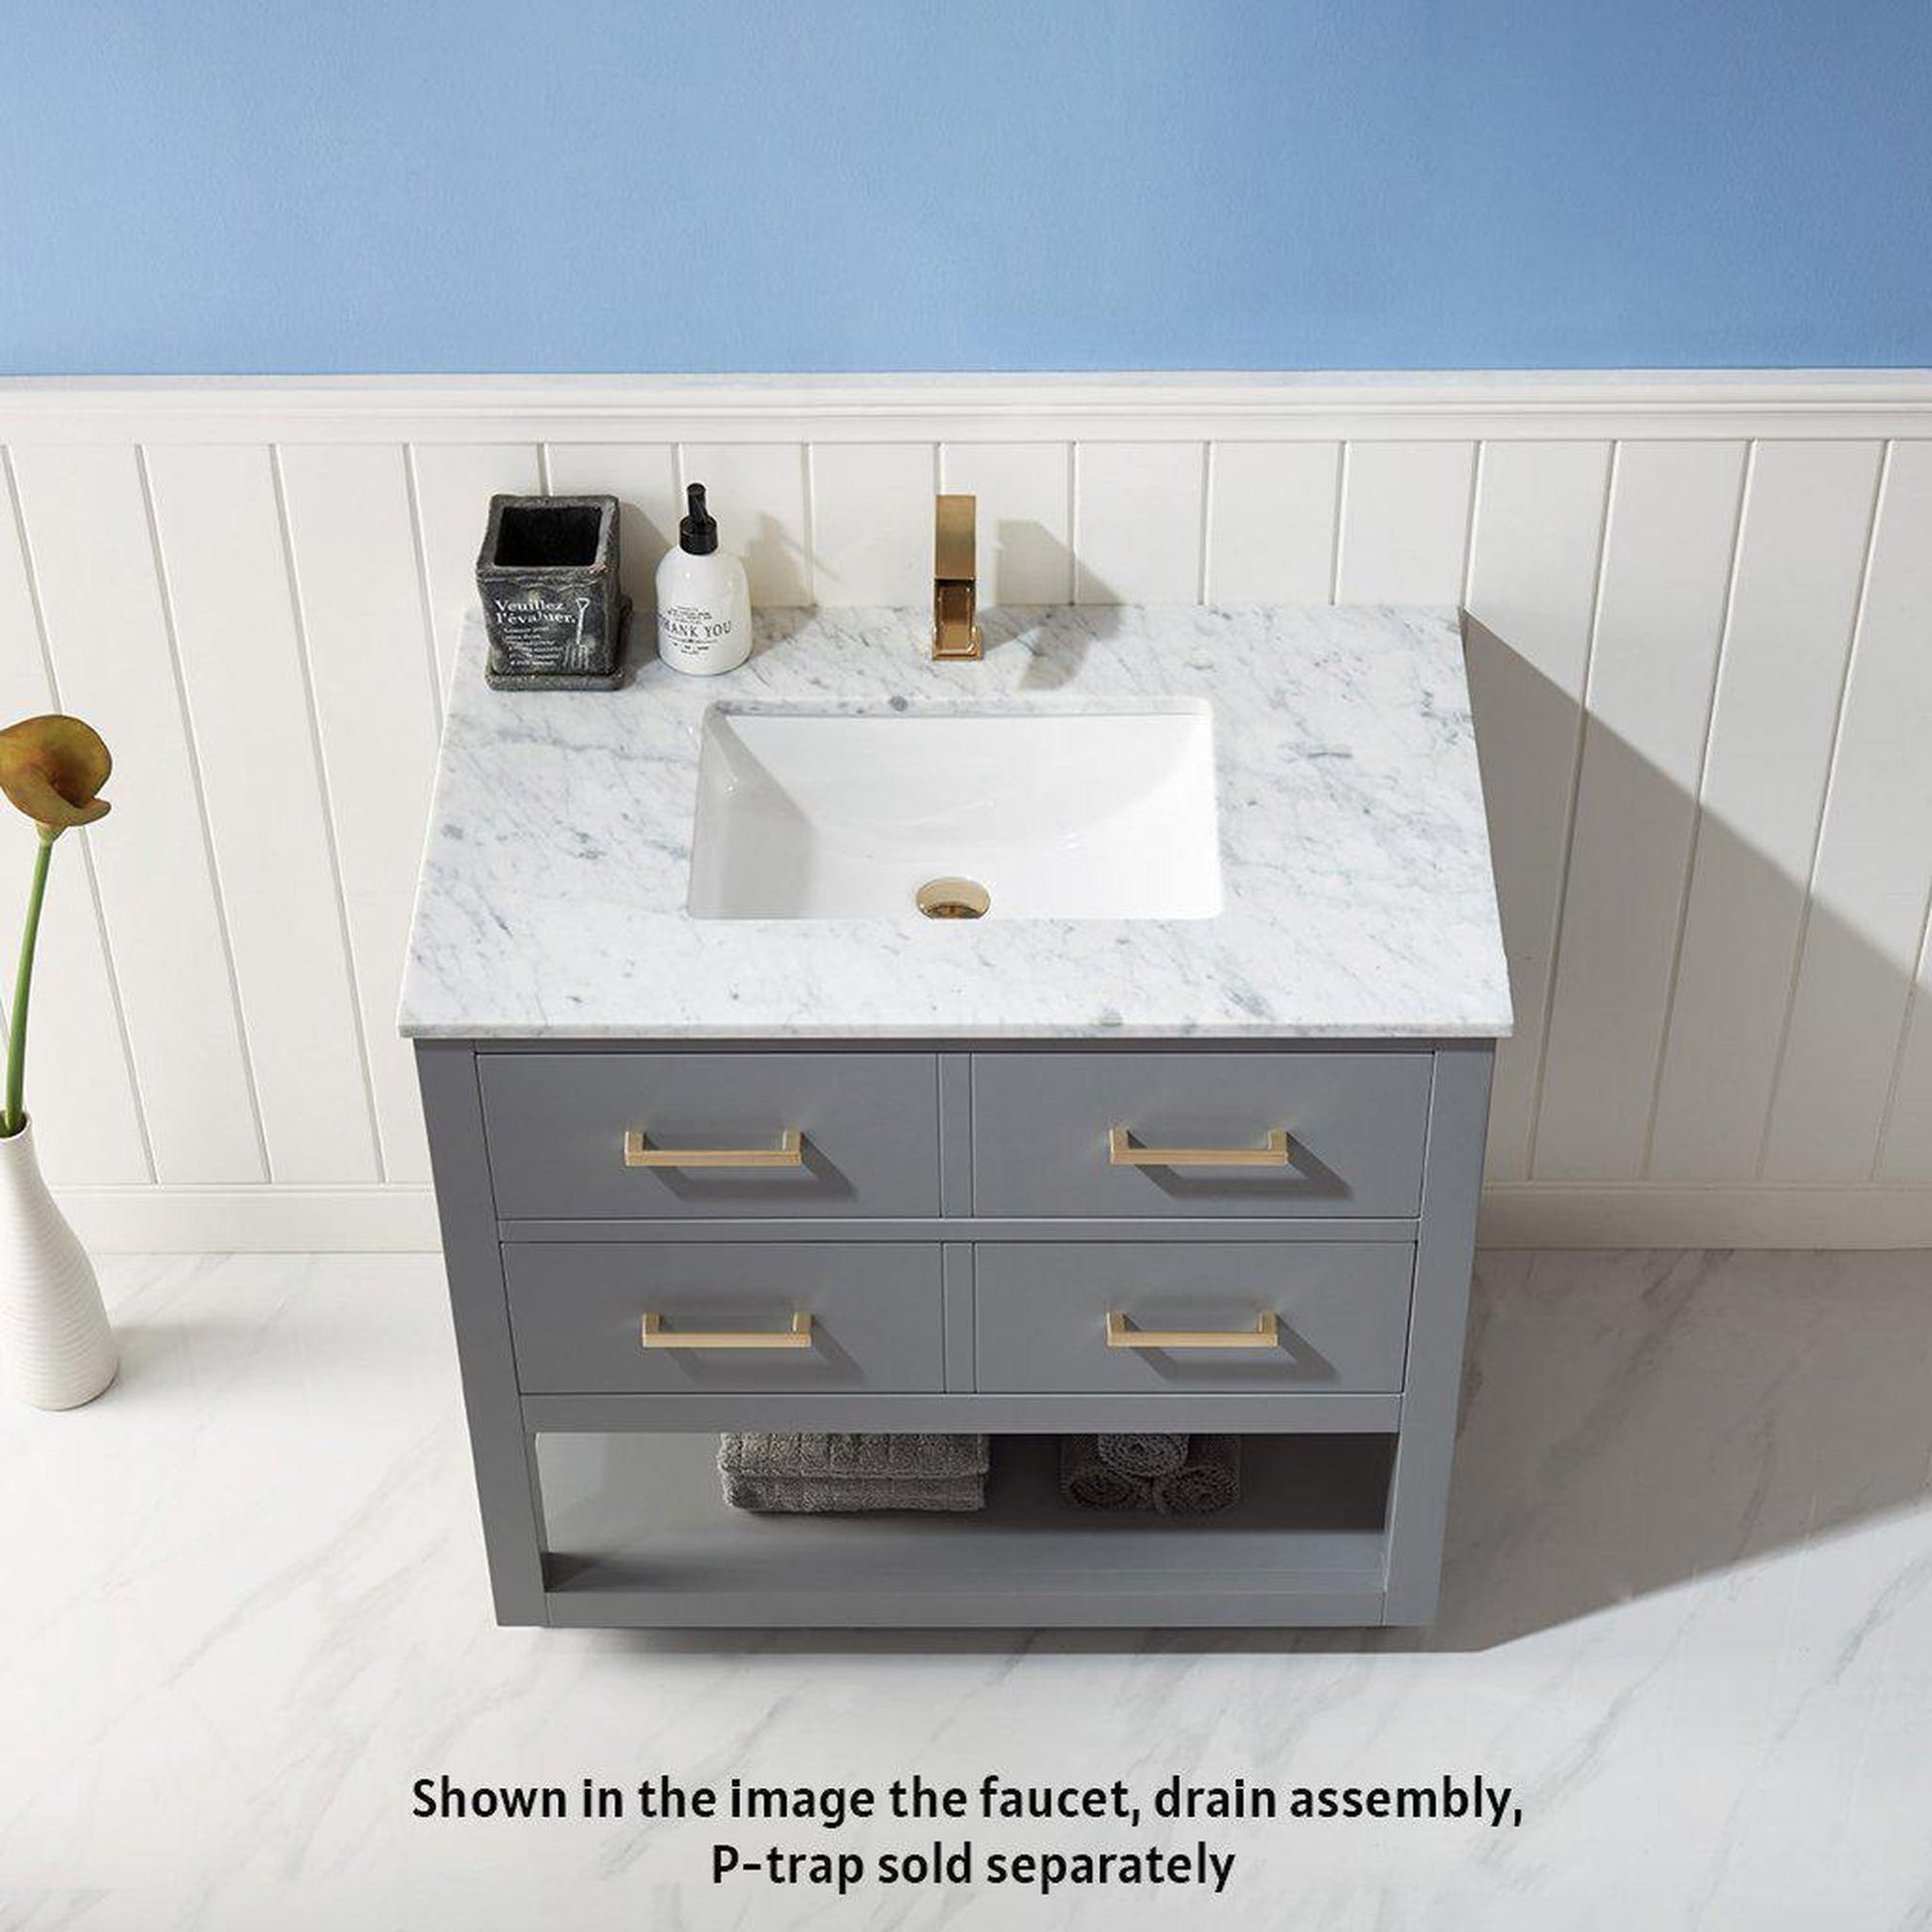 Altair Remi 36" Single Gray Freestanding Bathroom Vanity Set With Natural Carrara White Marble Top, Rectangular Undermount Ceramic Sink, and Overflow